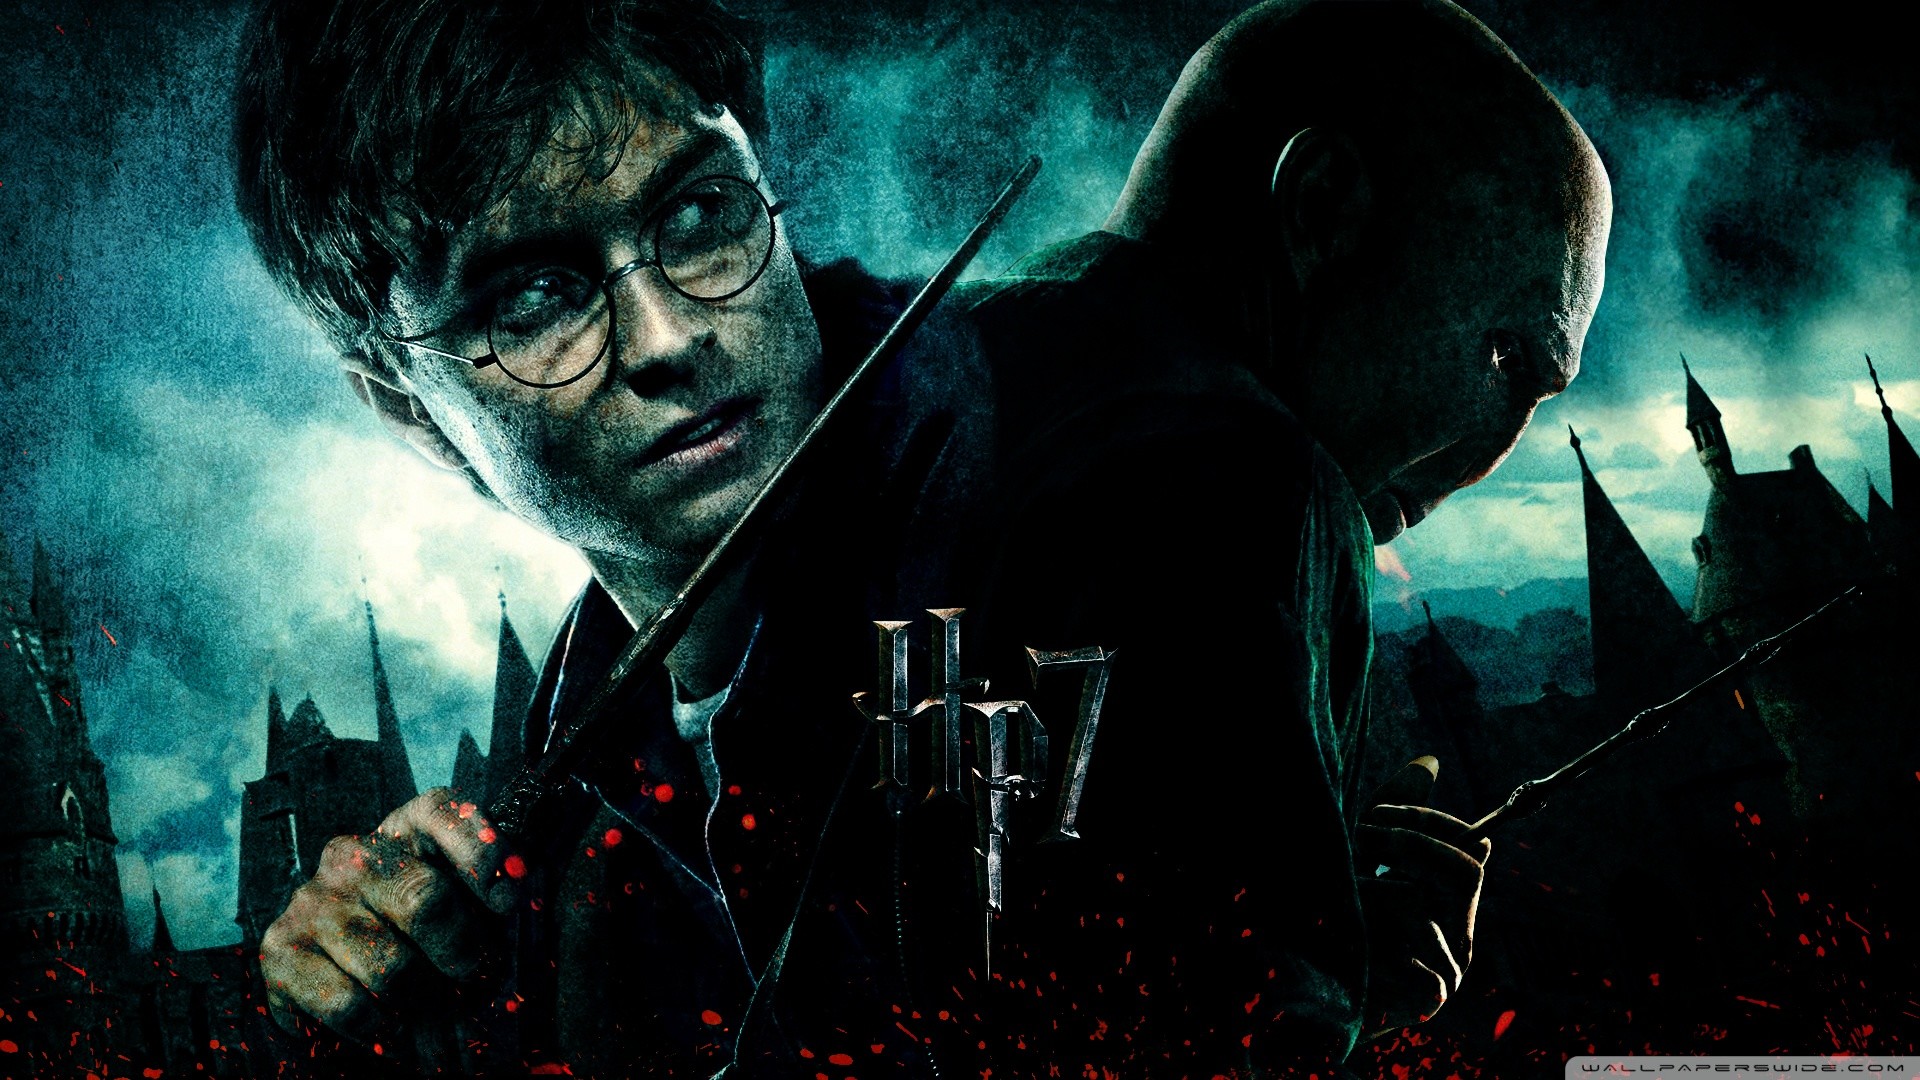 harry potter movie wallpaper,movie,darkness,performance,musician,fictional character